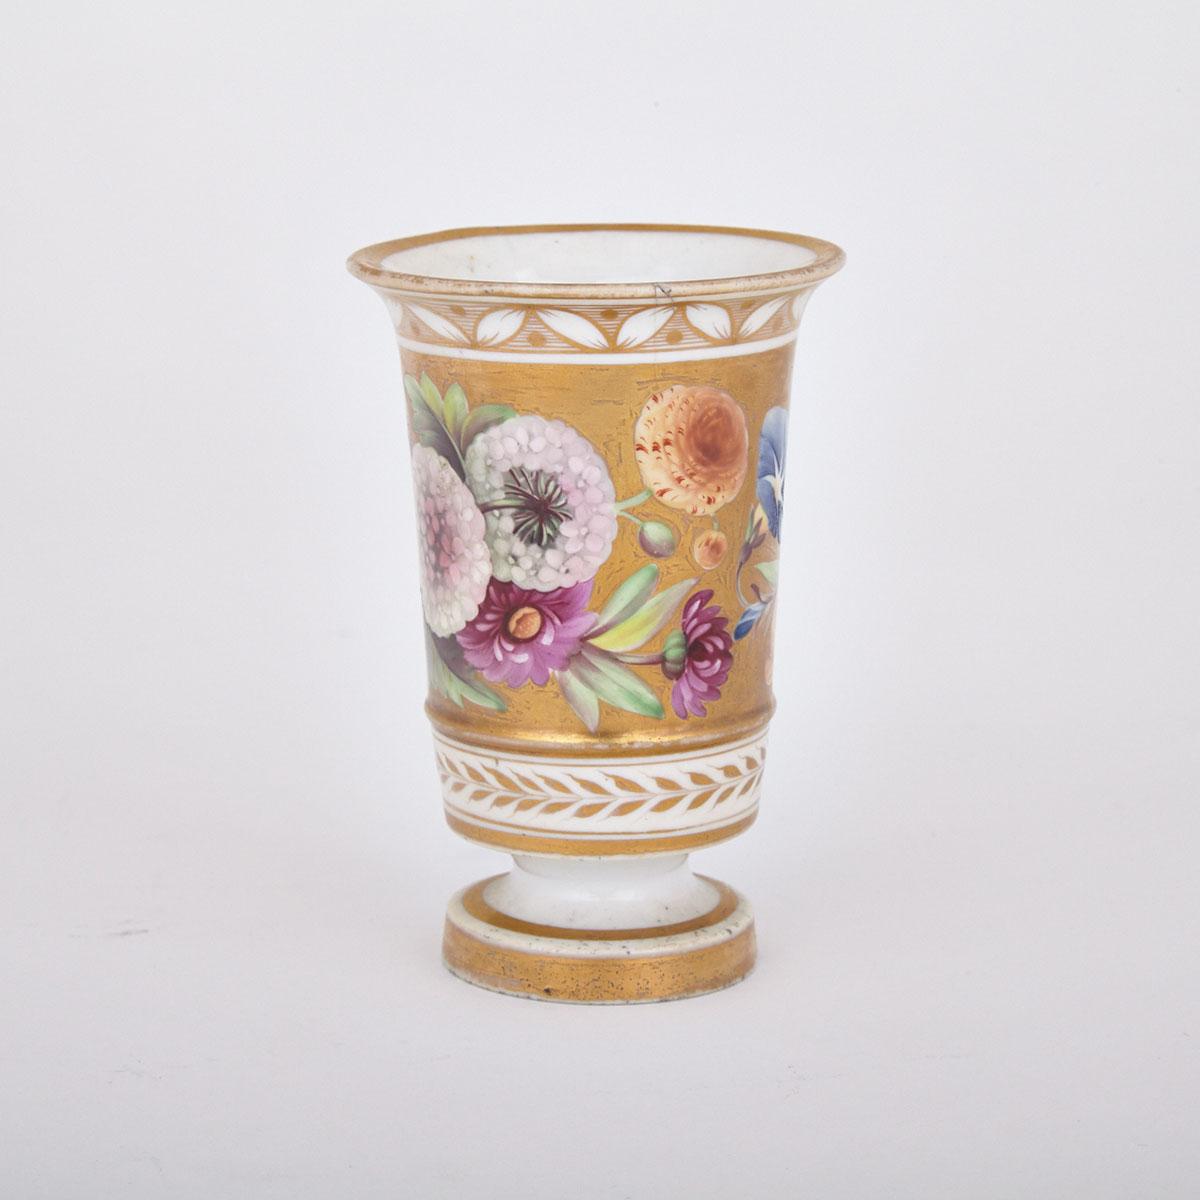 English Porcelain Gilt-Ground Floral Spill Vase, early 19th century